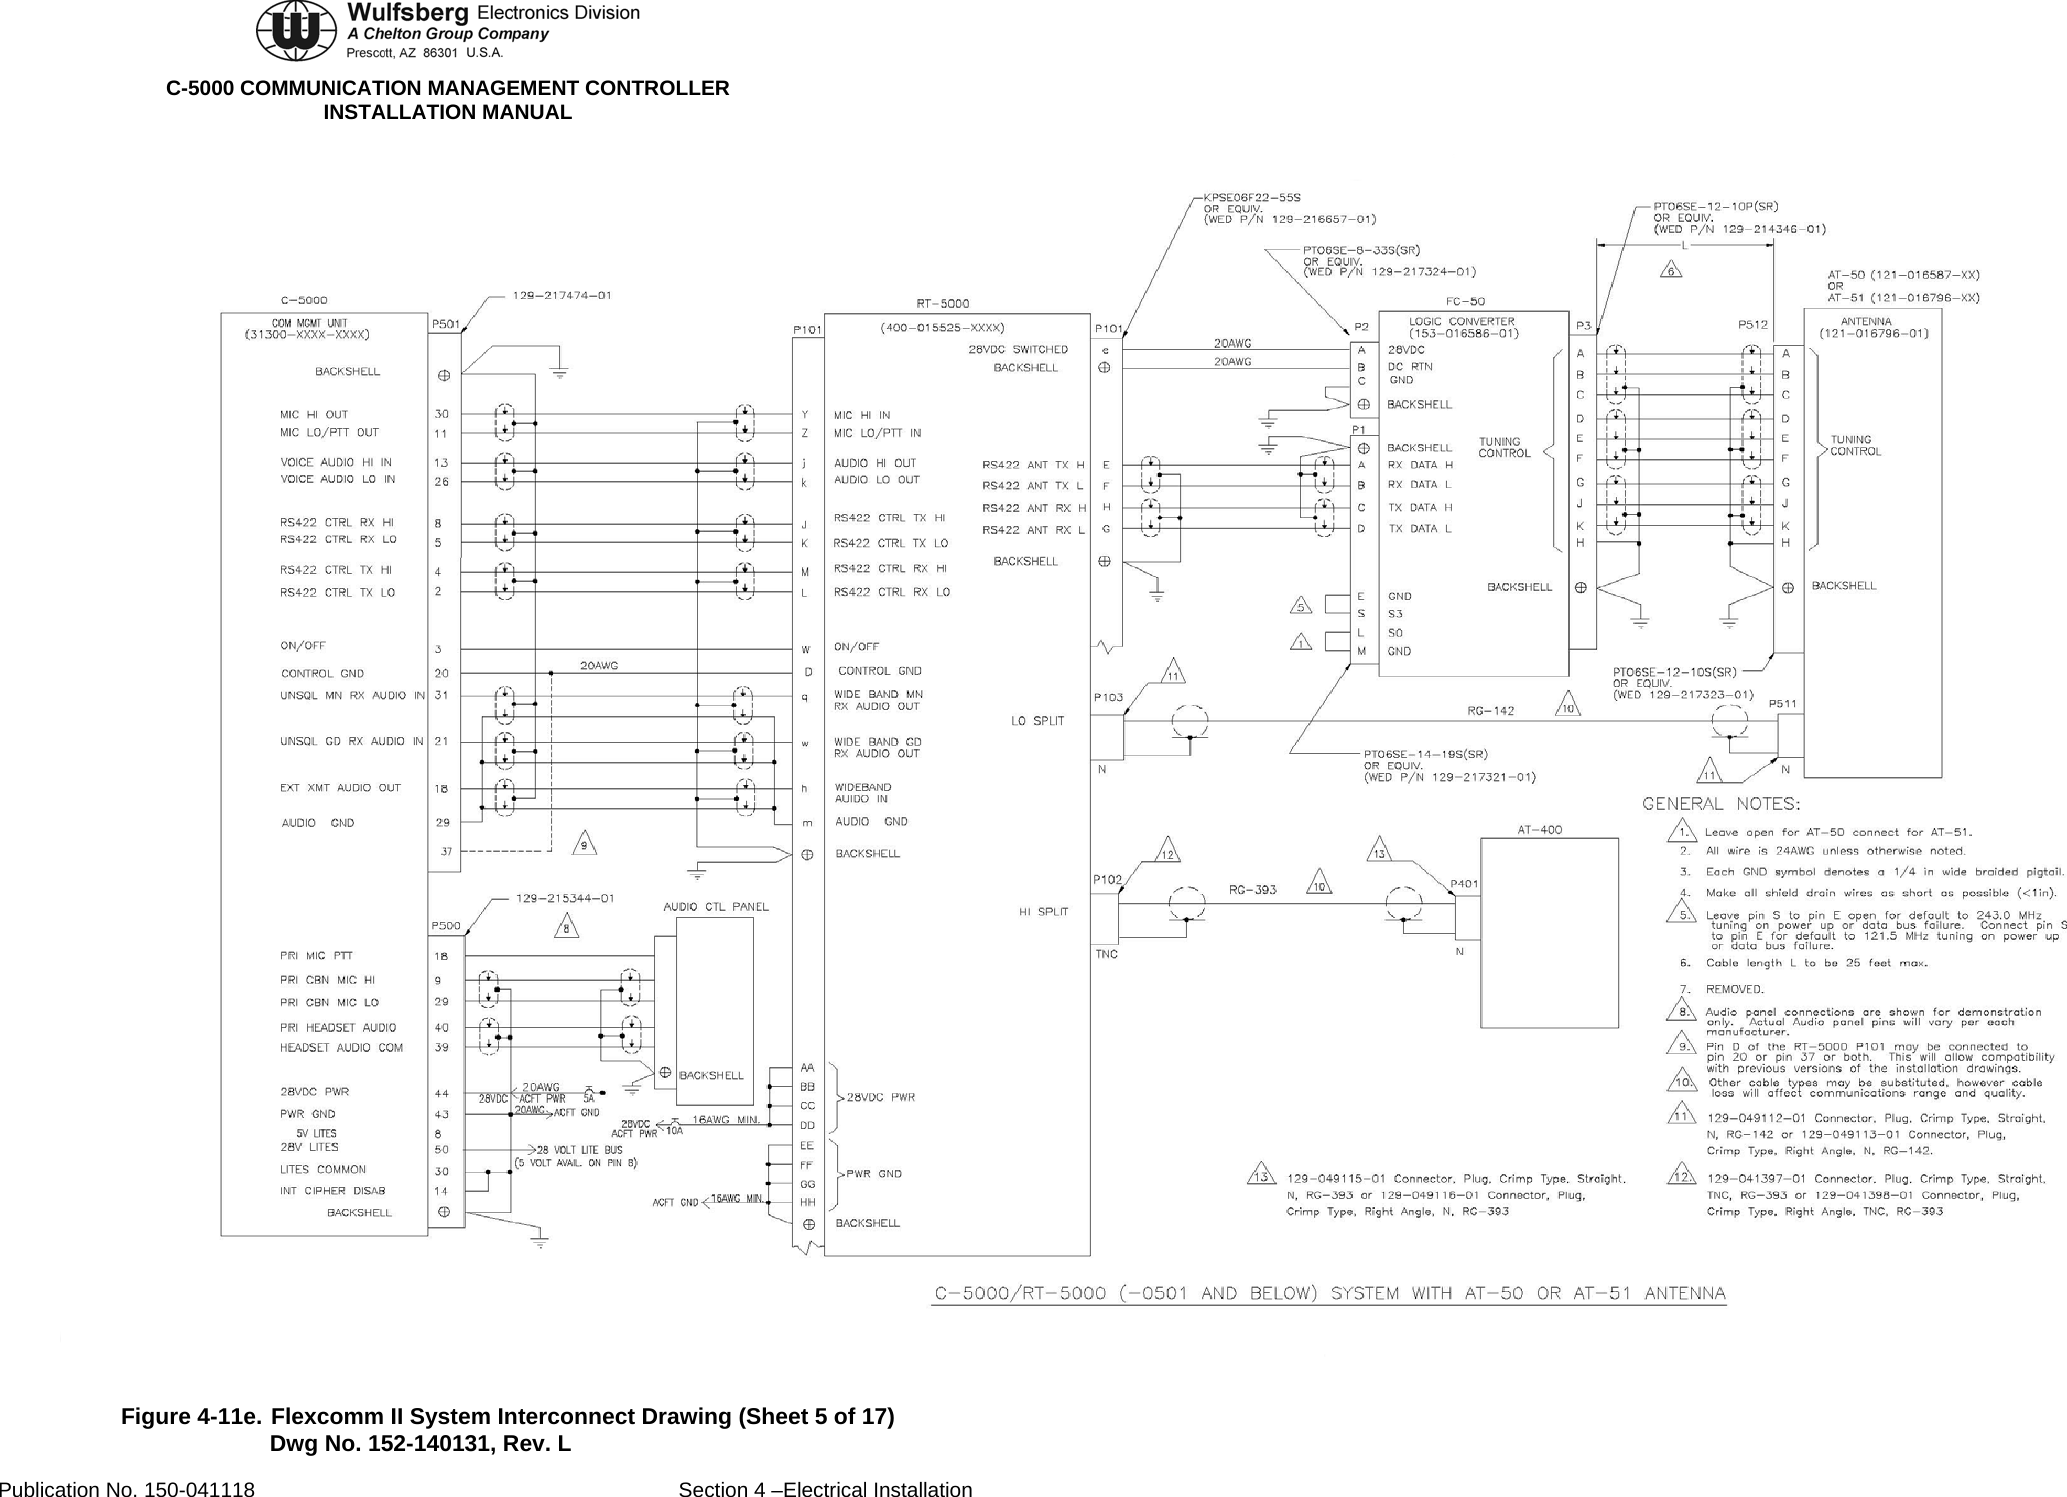  C-5000 COMMUNICATION MANAGEMENT CONTROLLER INSTALLATION MANUAL  Figure 4-11e. Flexcomm II System Interconnect Drawing (Sheet 5 of 17) Dwg No. 152-140131, Rev. L Publication No. 150-041118  Section 4 –Electrical Installation 